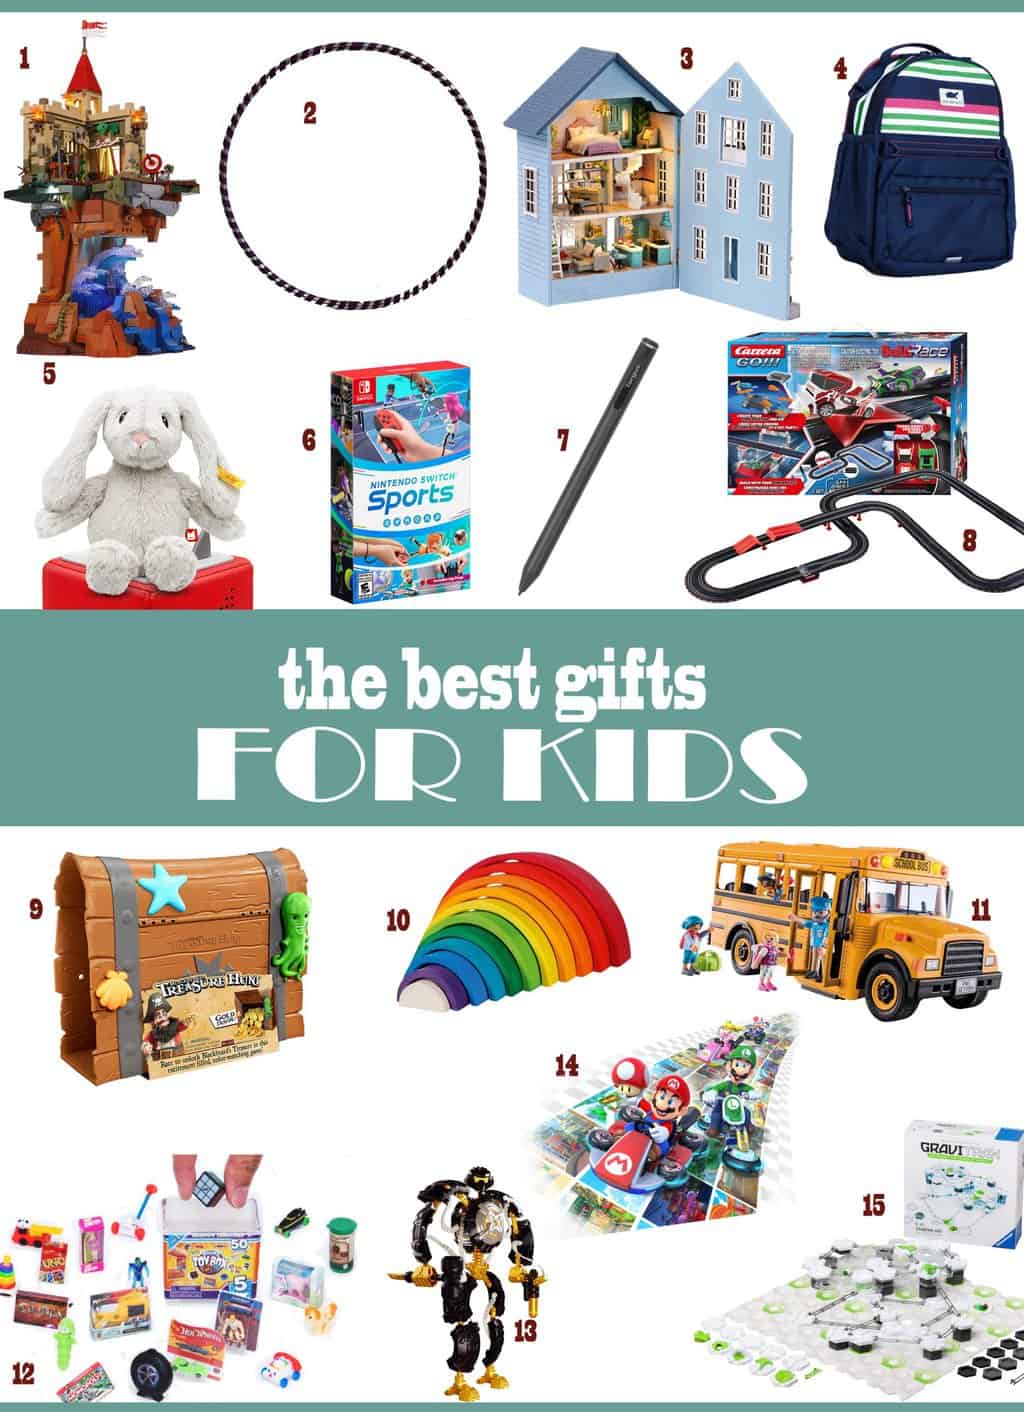 Choosing Safe Gifts For Kids This Holiday Season